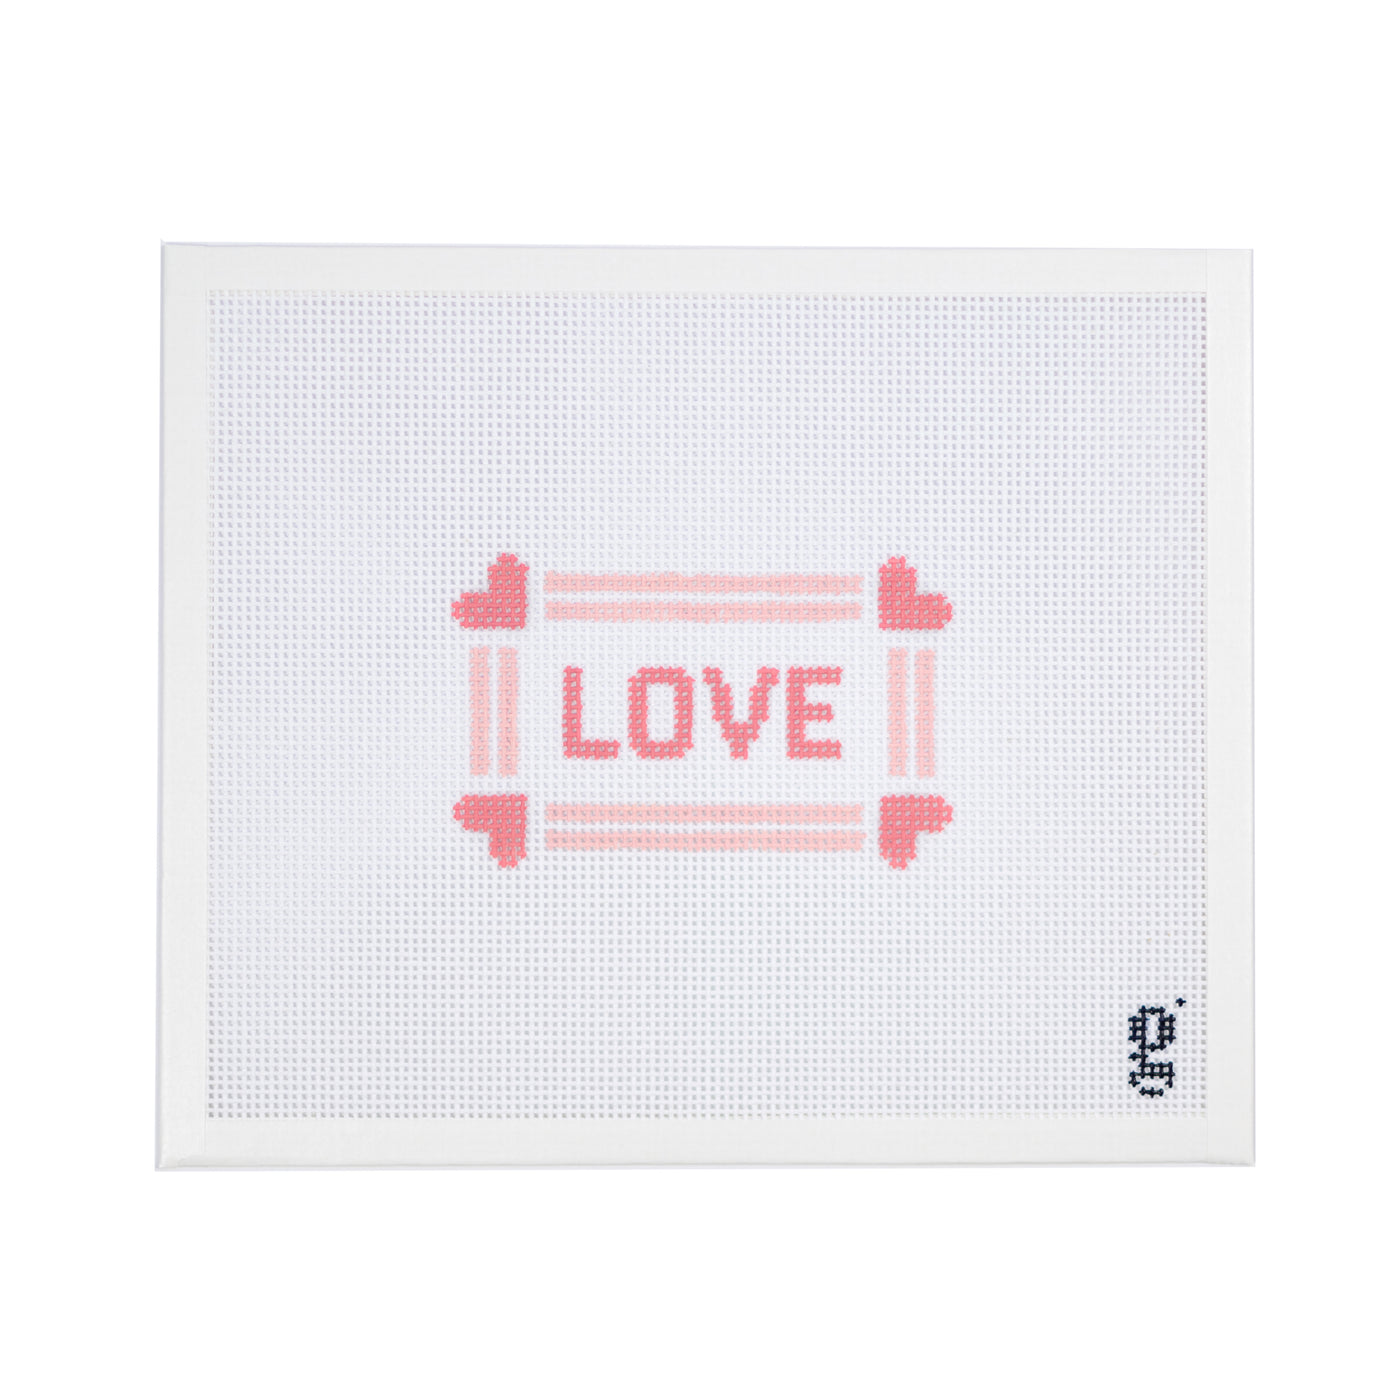 White needlepoint canvas with the word "LOVE" in pink block letters at center. The word is surrounded by a lighter pink double stripe with 4 darker pink hearts at each corner.